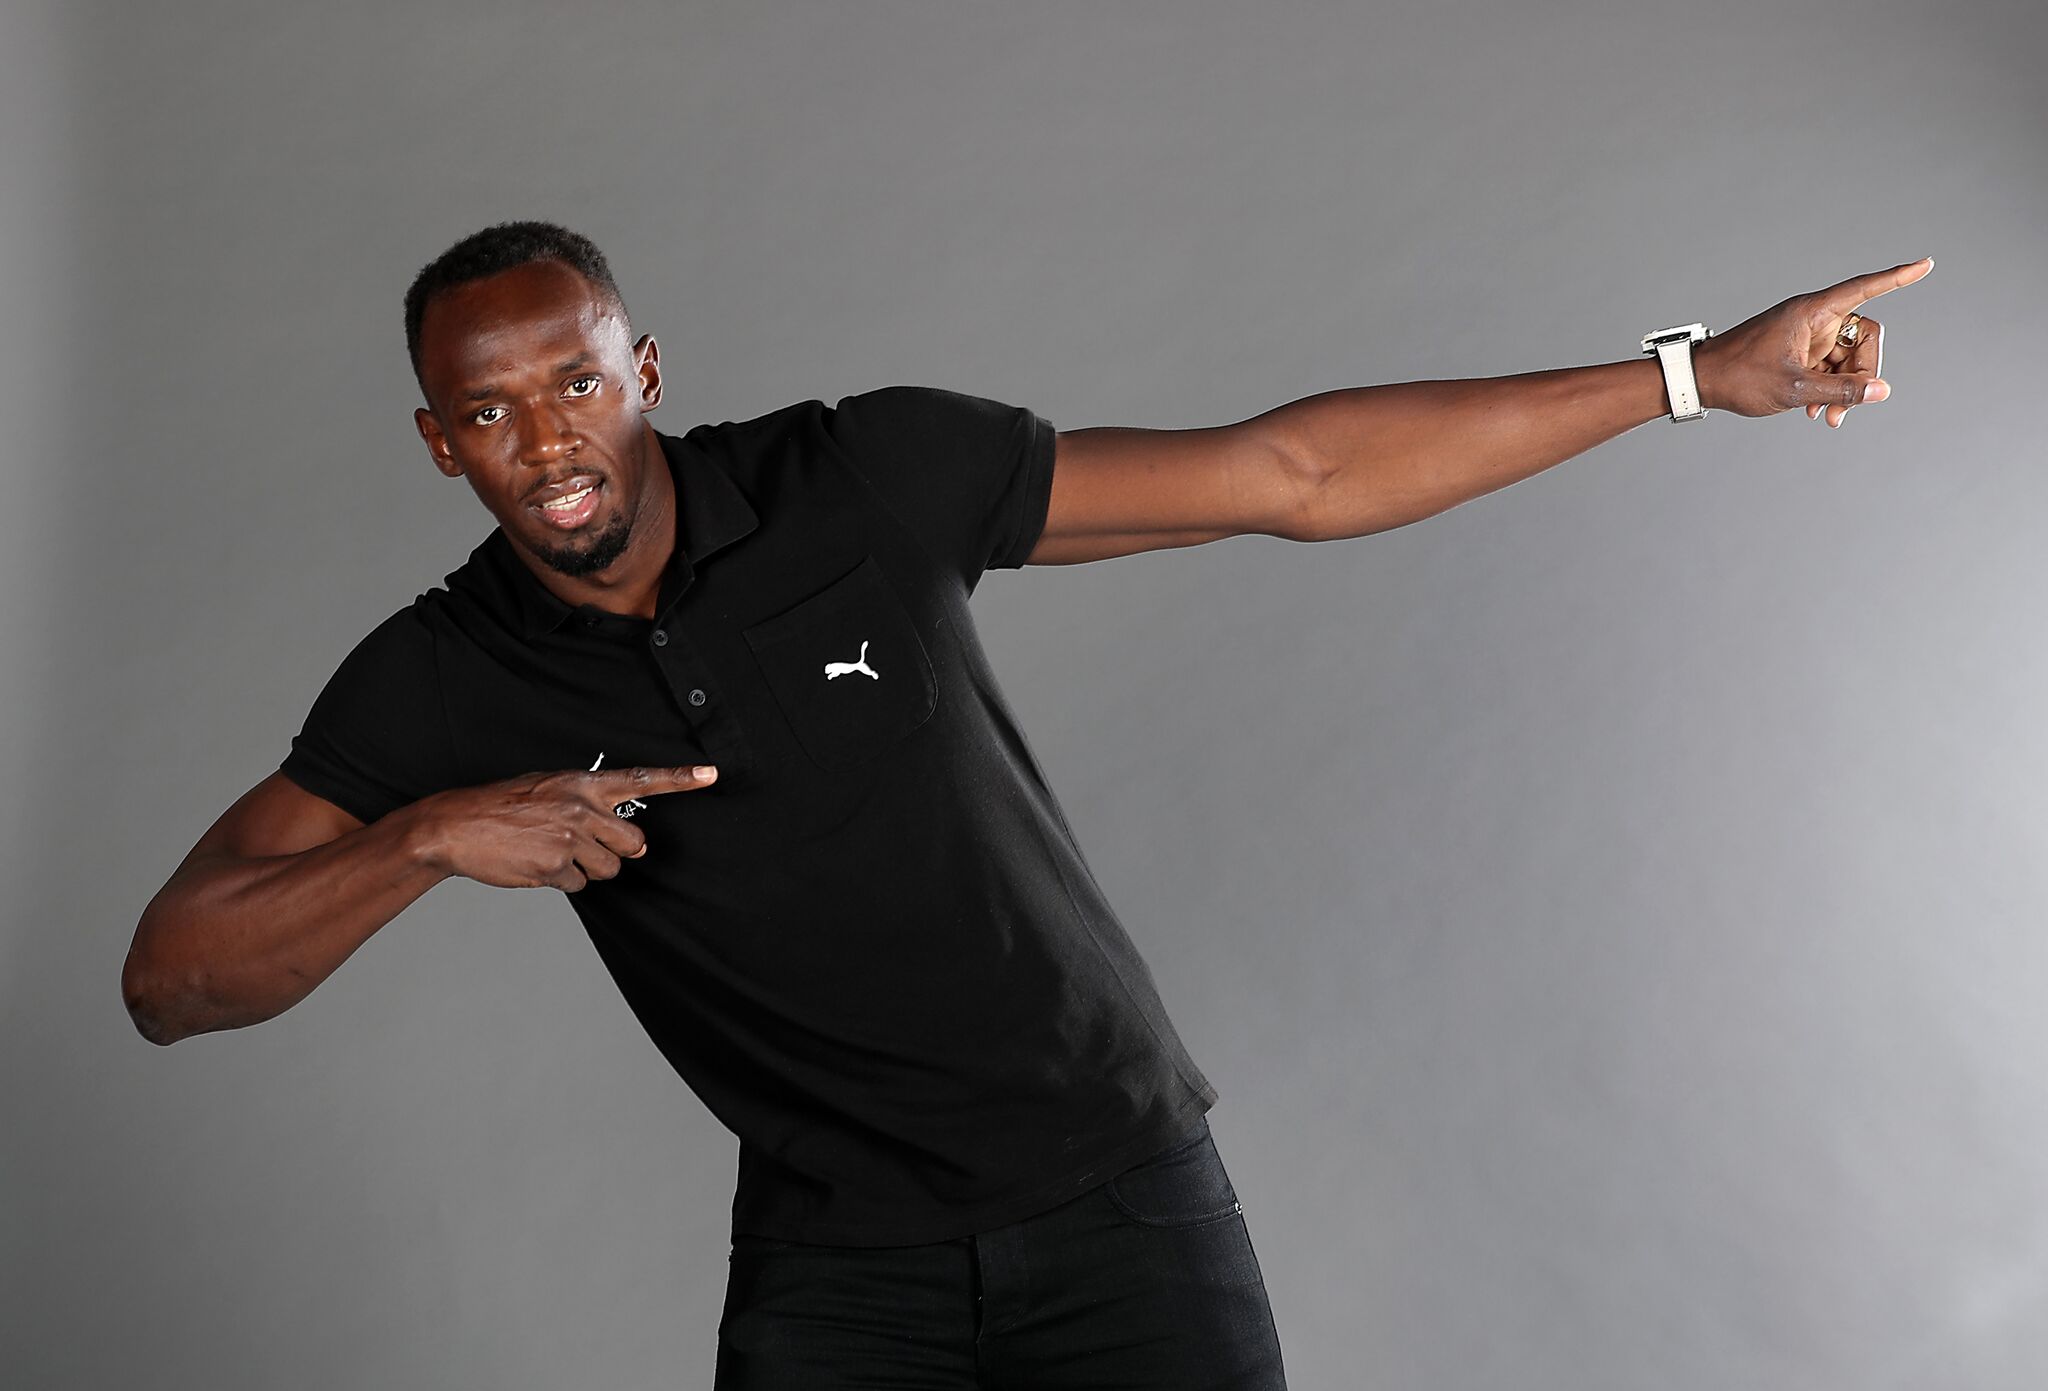 Bolt to attend Commonwealth Games